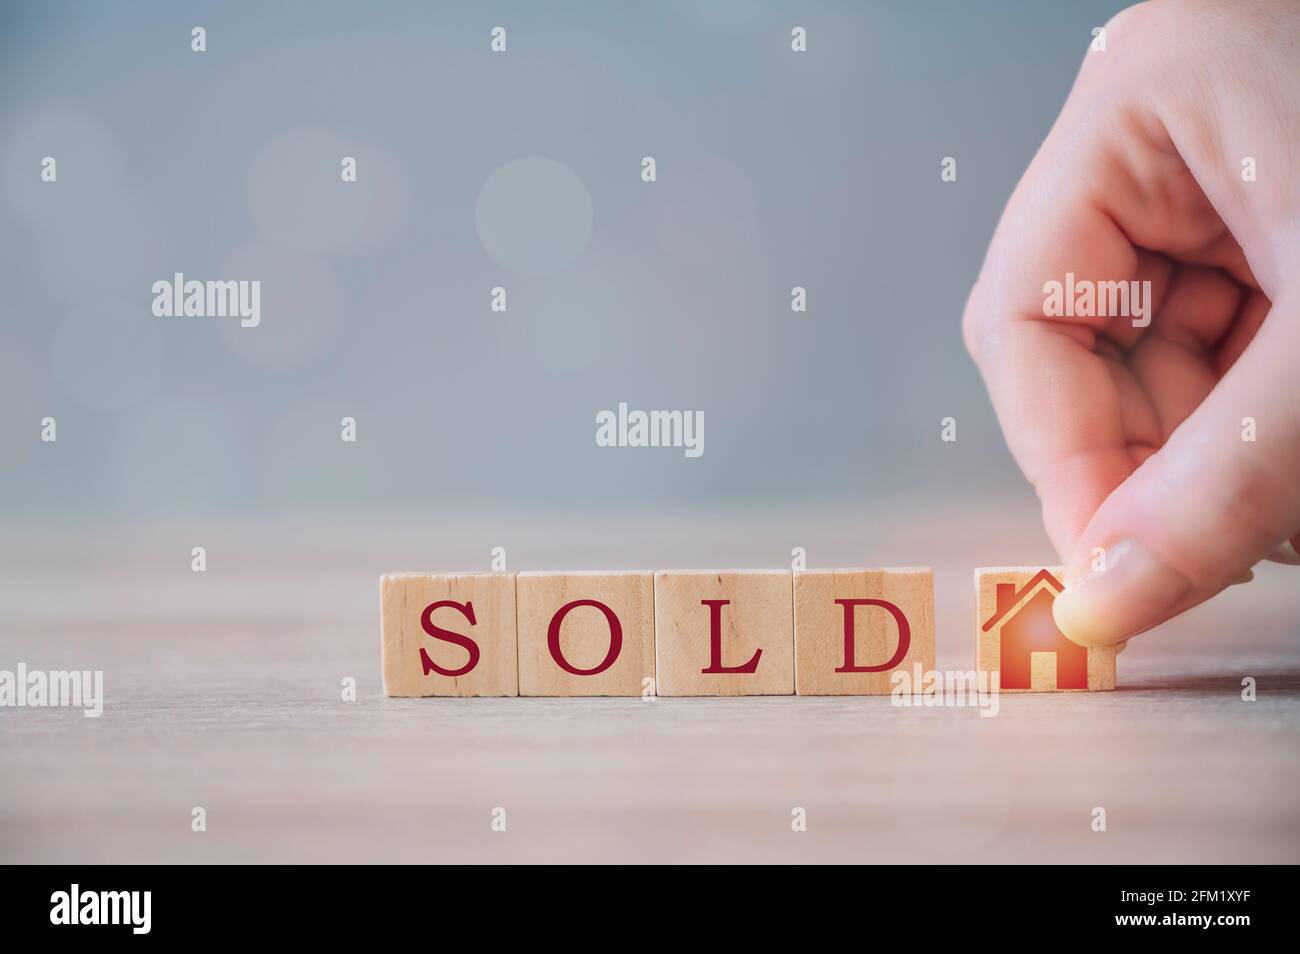 Hand puts a cube with a picture of the house to the word SOLD. Concept of selling a house, apartment, real estate. Property trade. Stock Photo